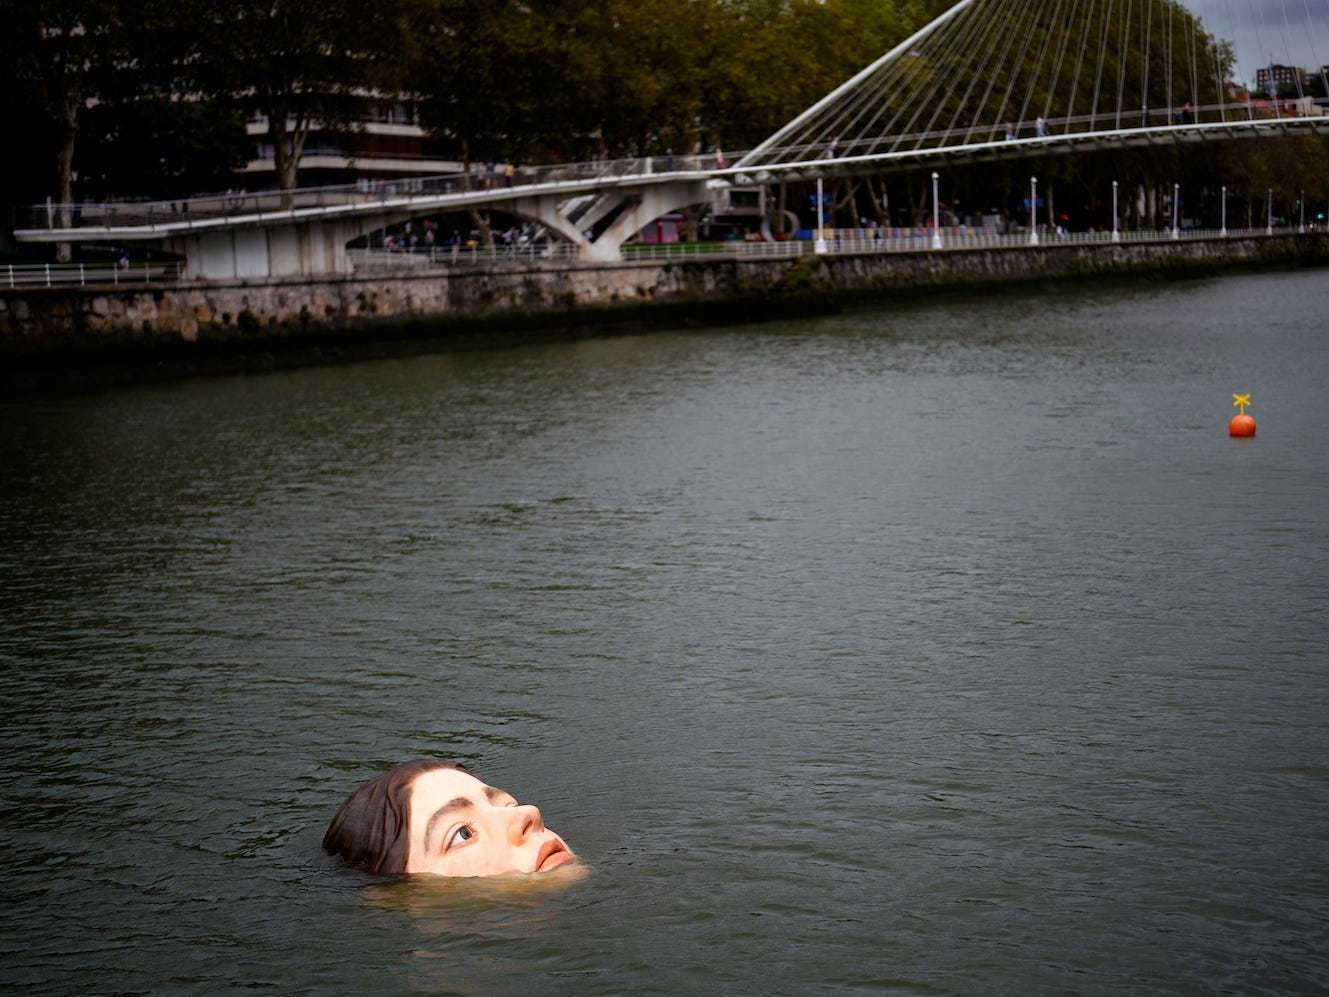 A fiberglass sculpture entitled "Bihar" ("Tomorrow" in Basque), by Mexican hyperrealist artist Ruben Orozco, is submerged in the Nervion river in Bilbao, Spain, September 27, 2021.